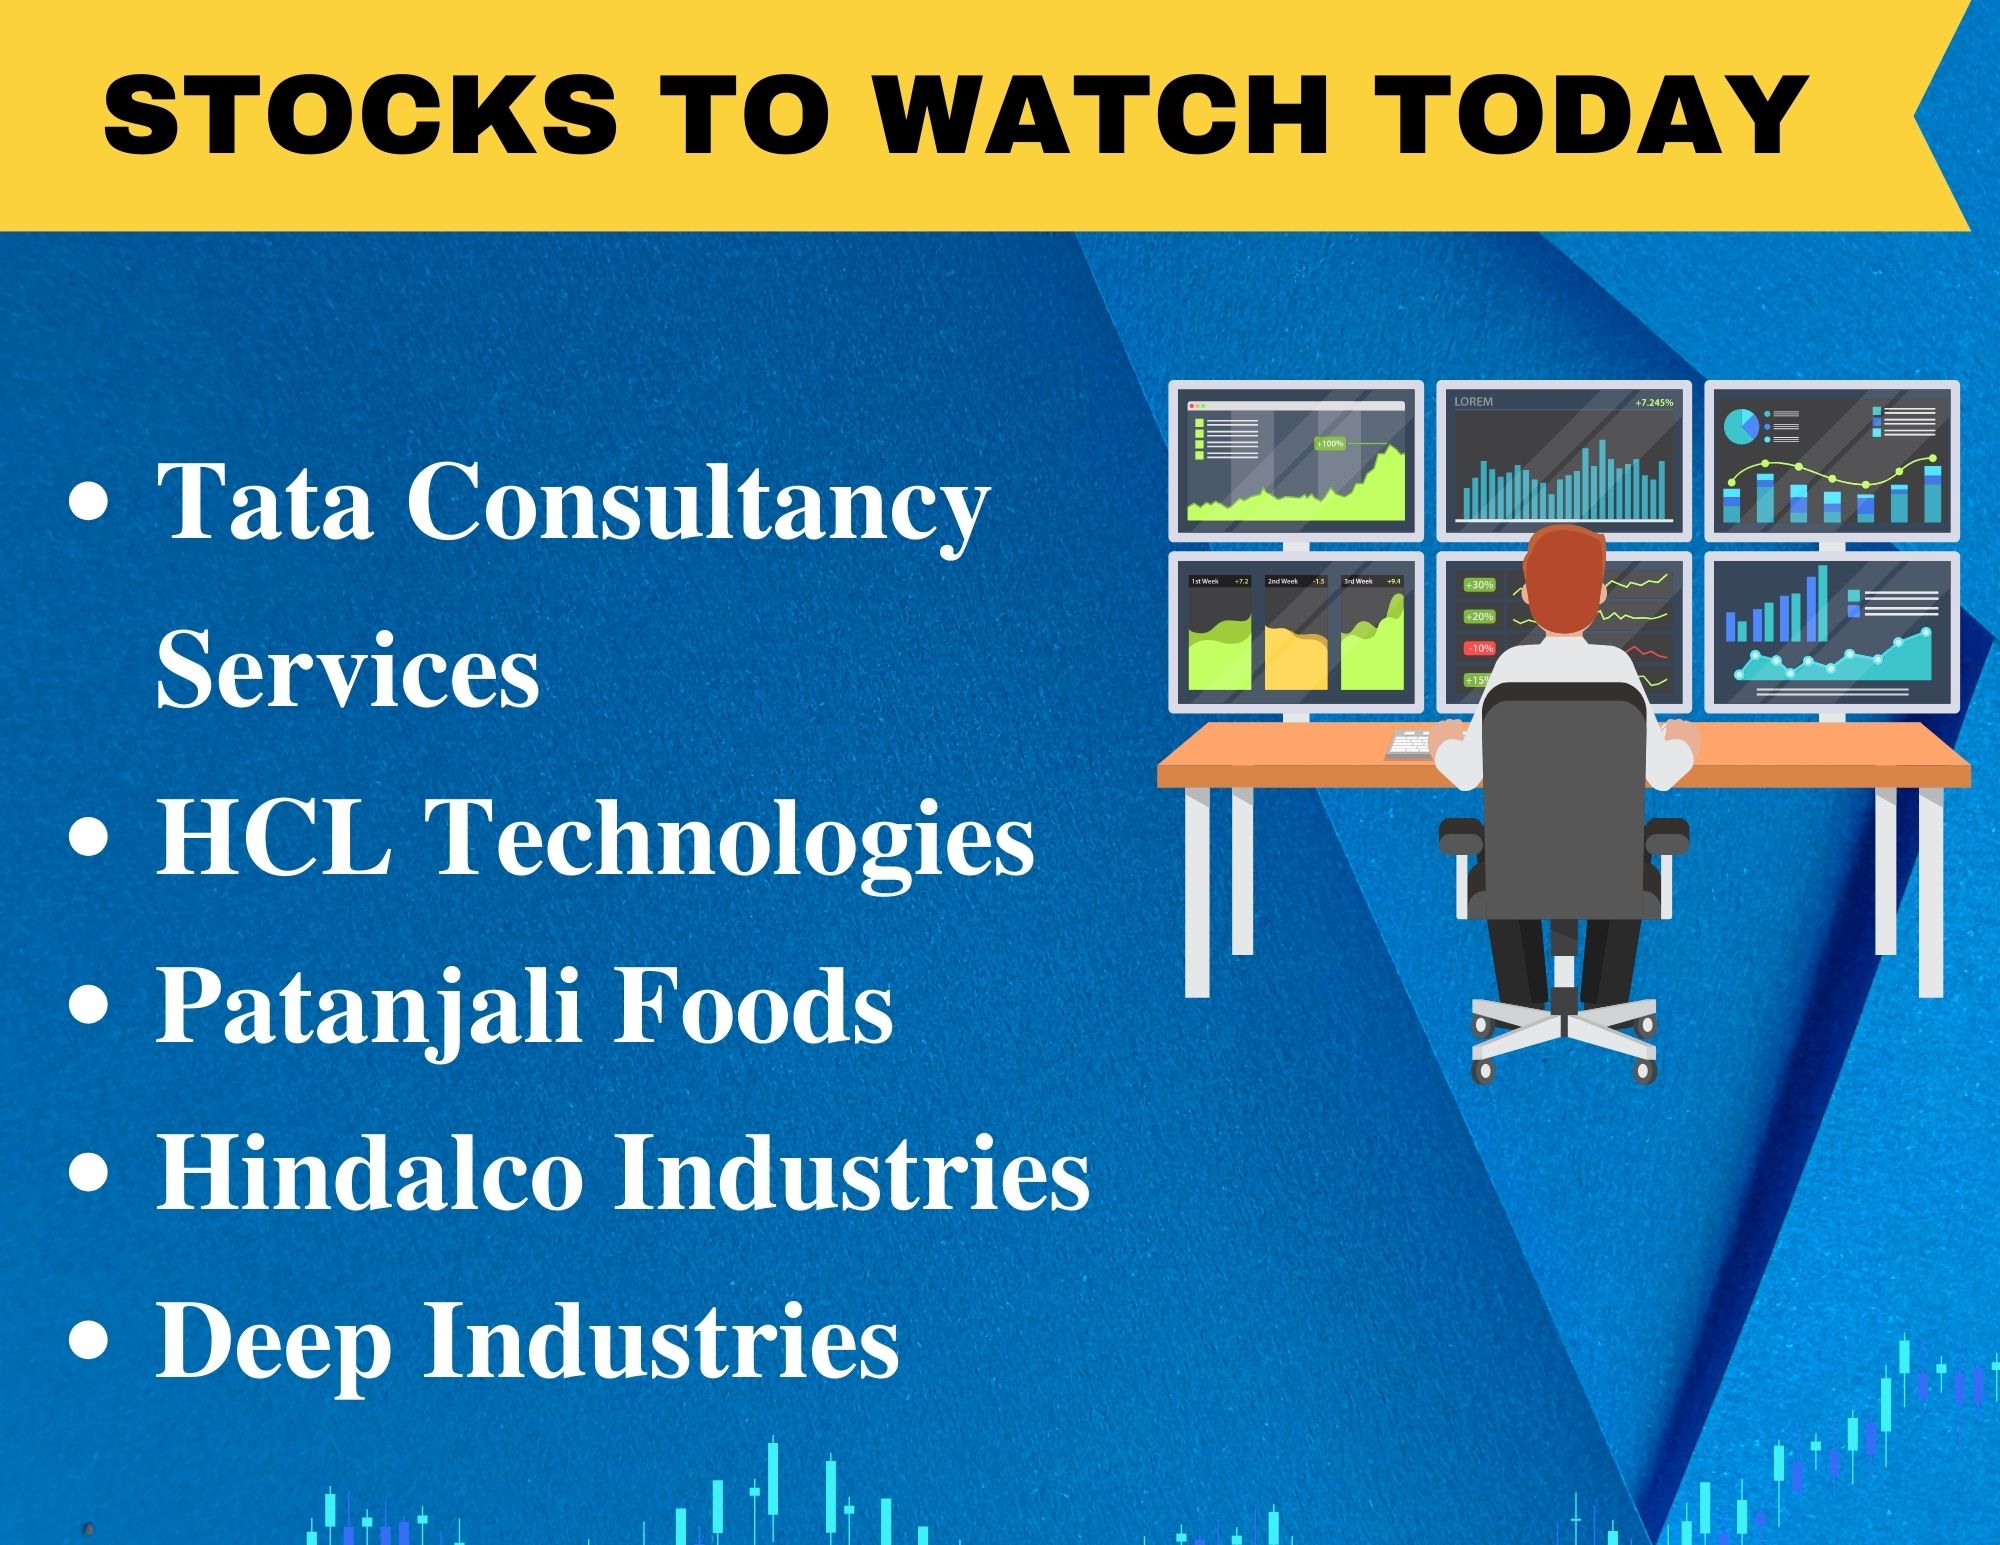 Stocks In News: Tata Consultancy Services, HCL Technologies, Patanjali Foods And More